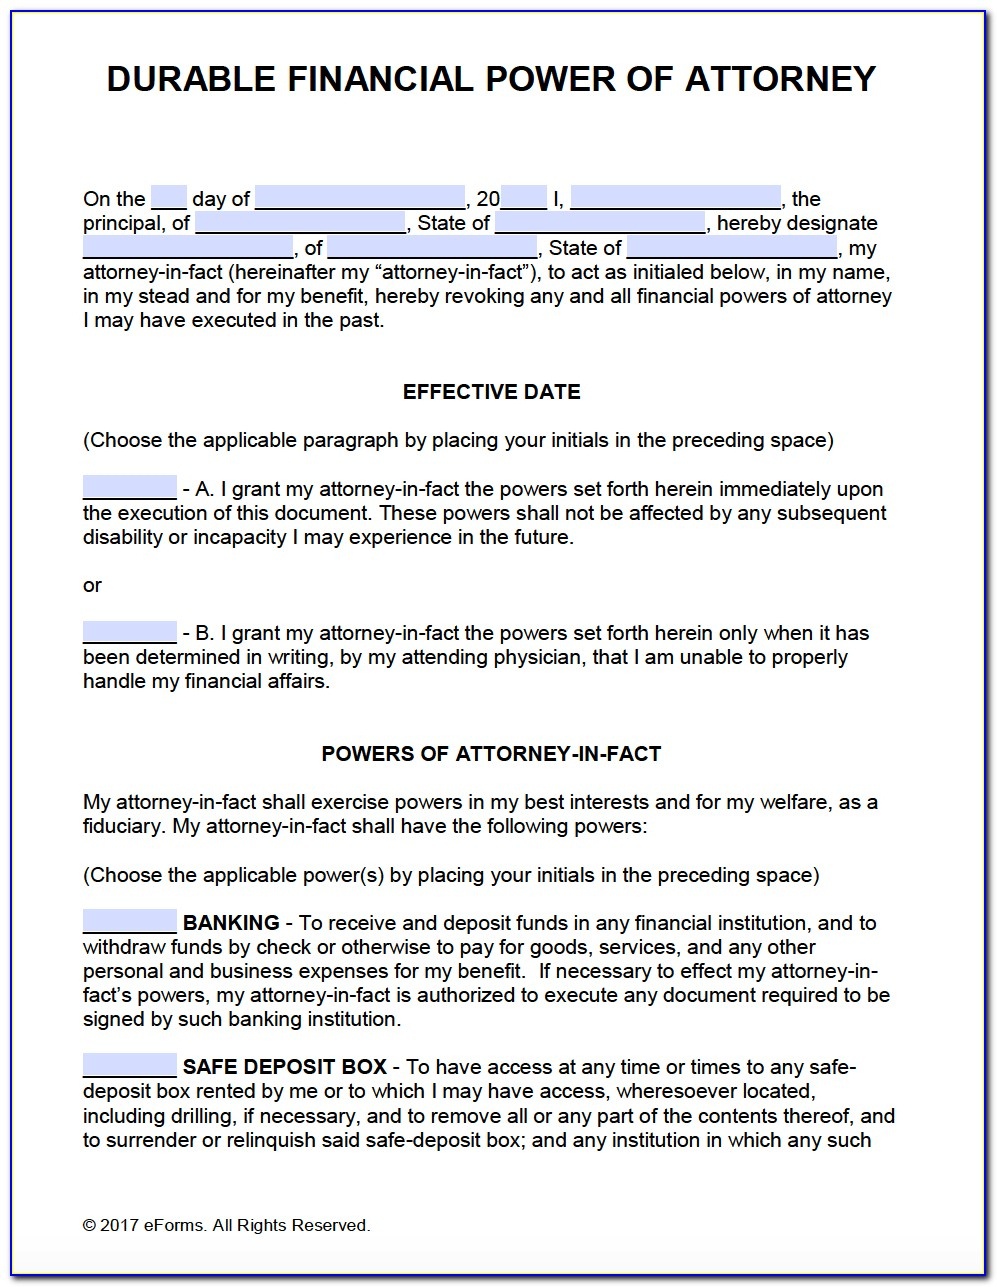 Free Printable Power Of Attorney Form Washington State - Form - Free Printable Power Of Attorney Form Washington State